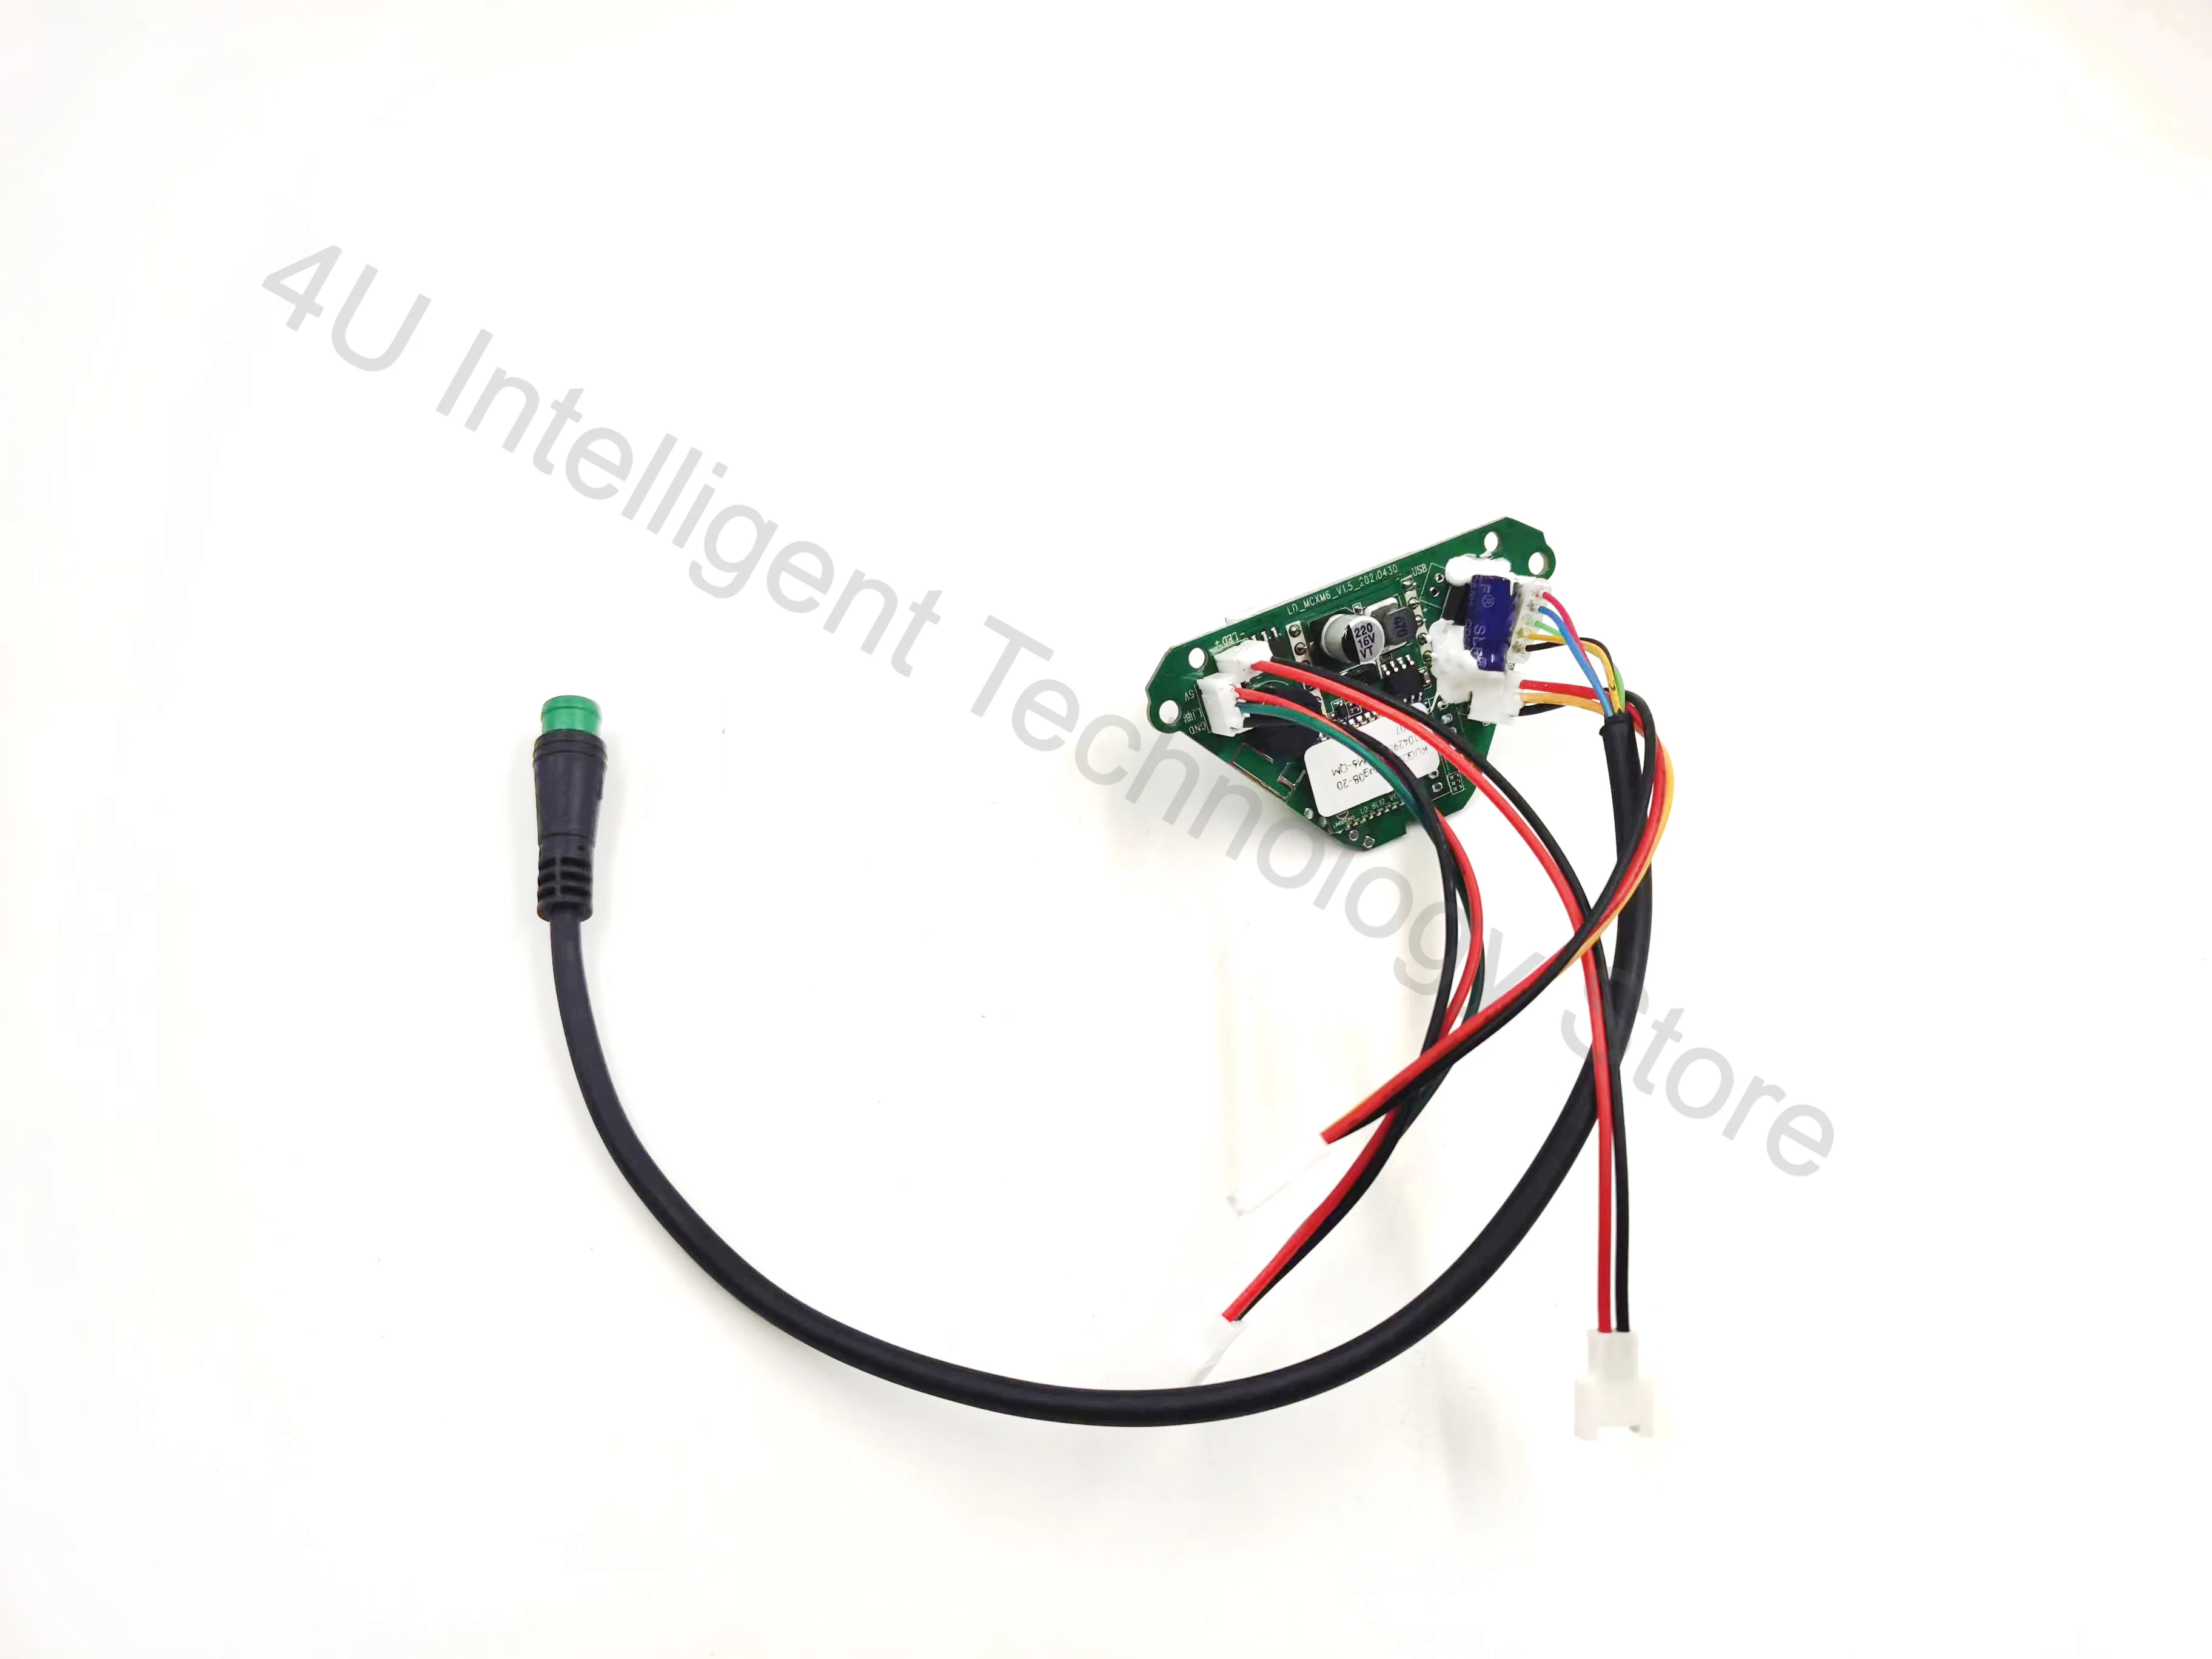 Scooter Parts Throttle Brake Controller Display for Kugoo Kirin S1 Electric Scooter Accessories Controller Set Parts